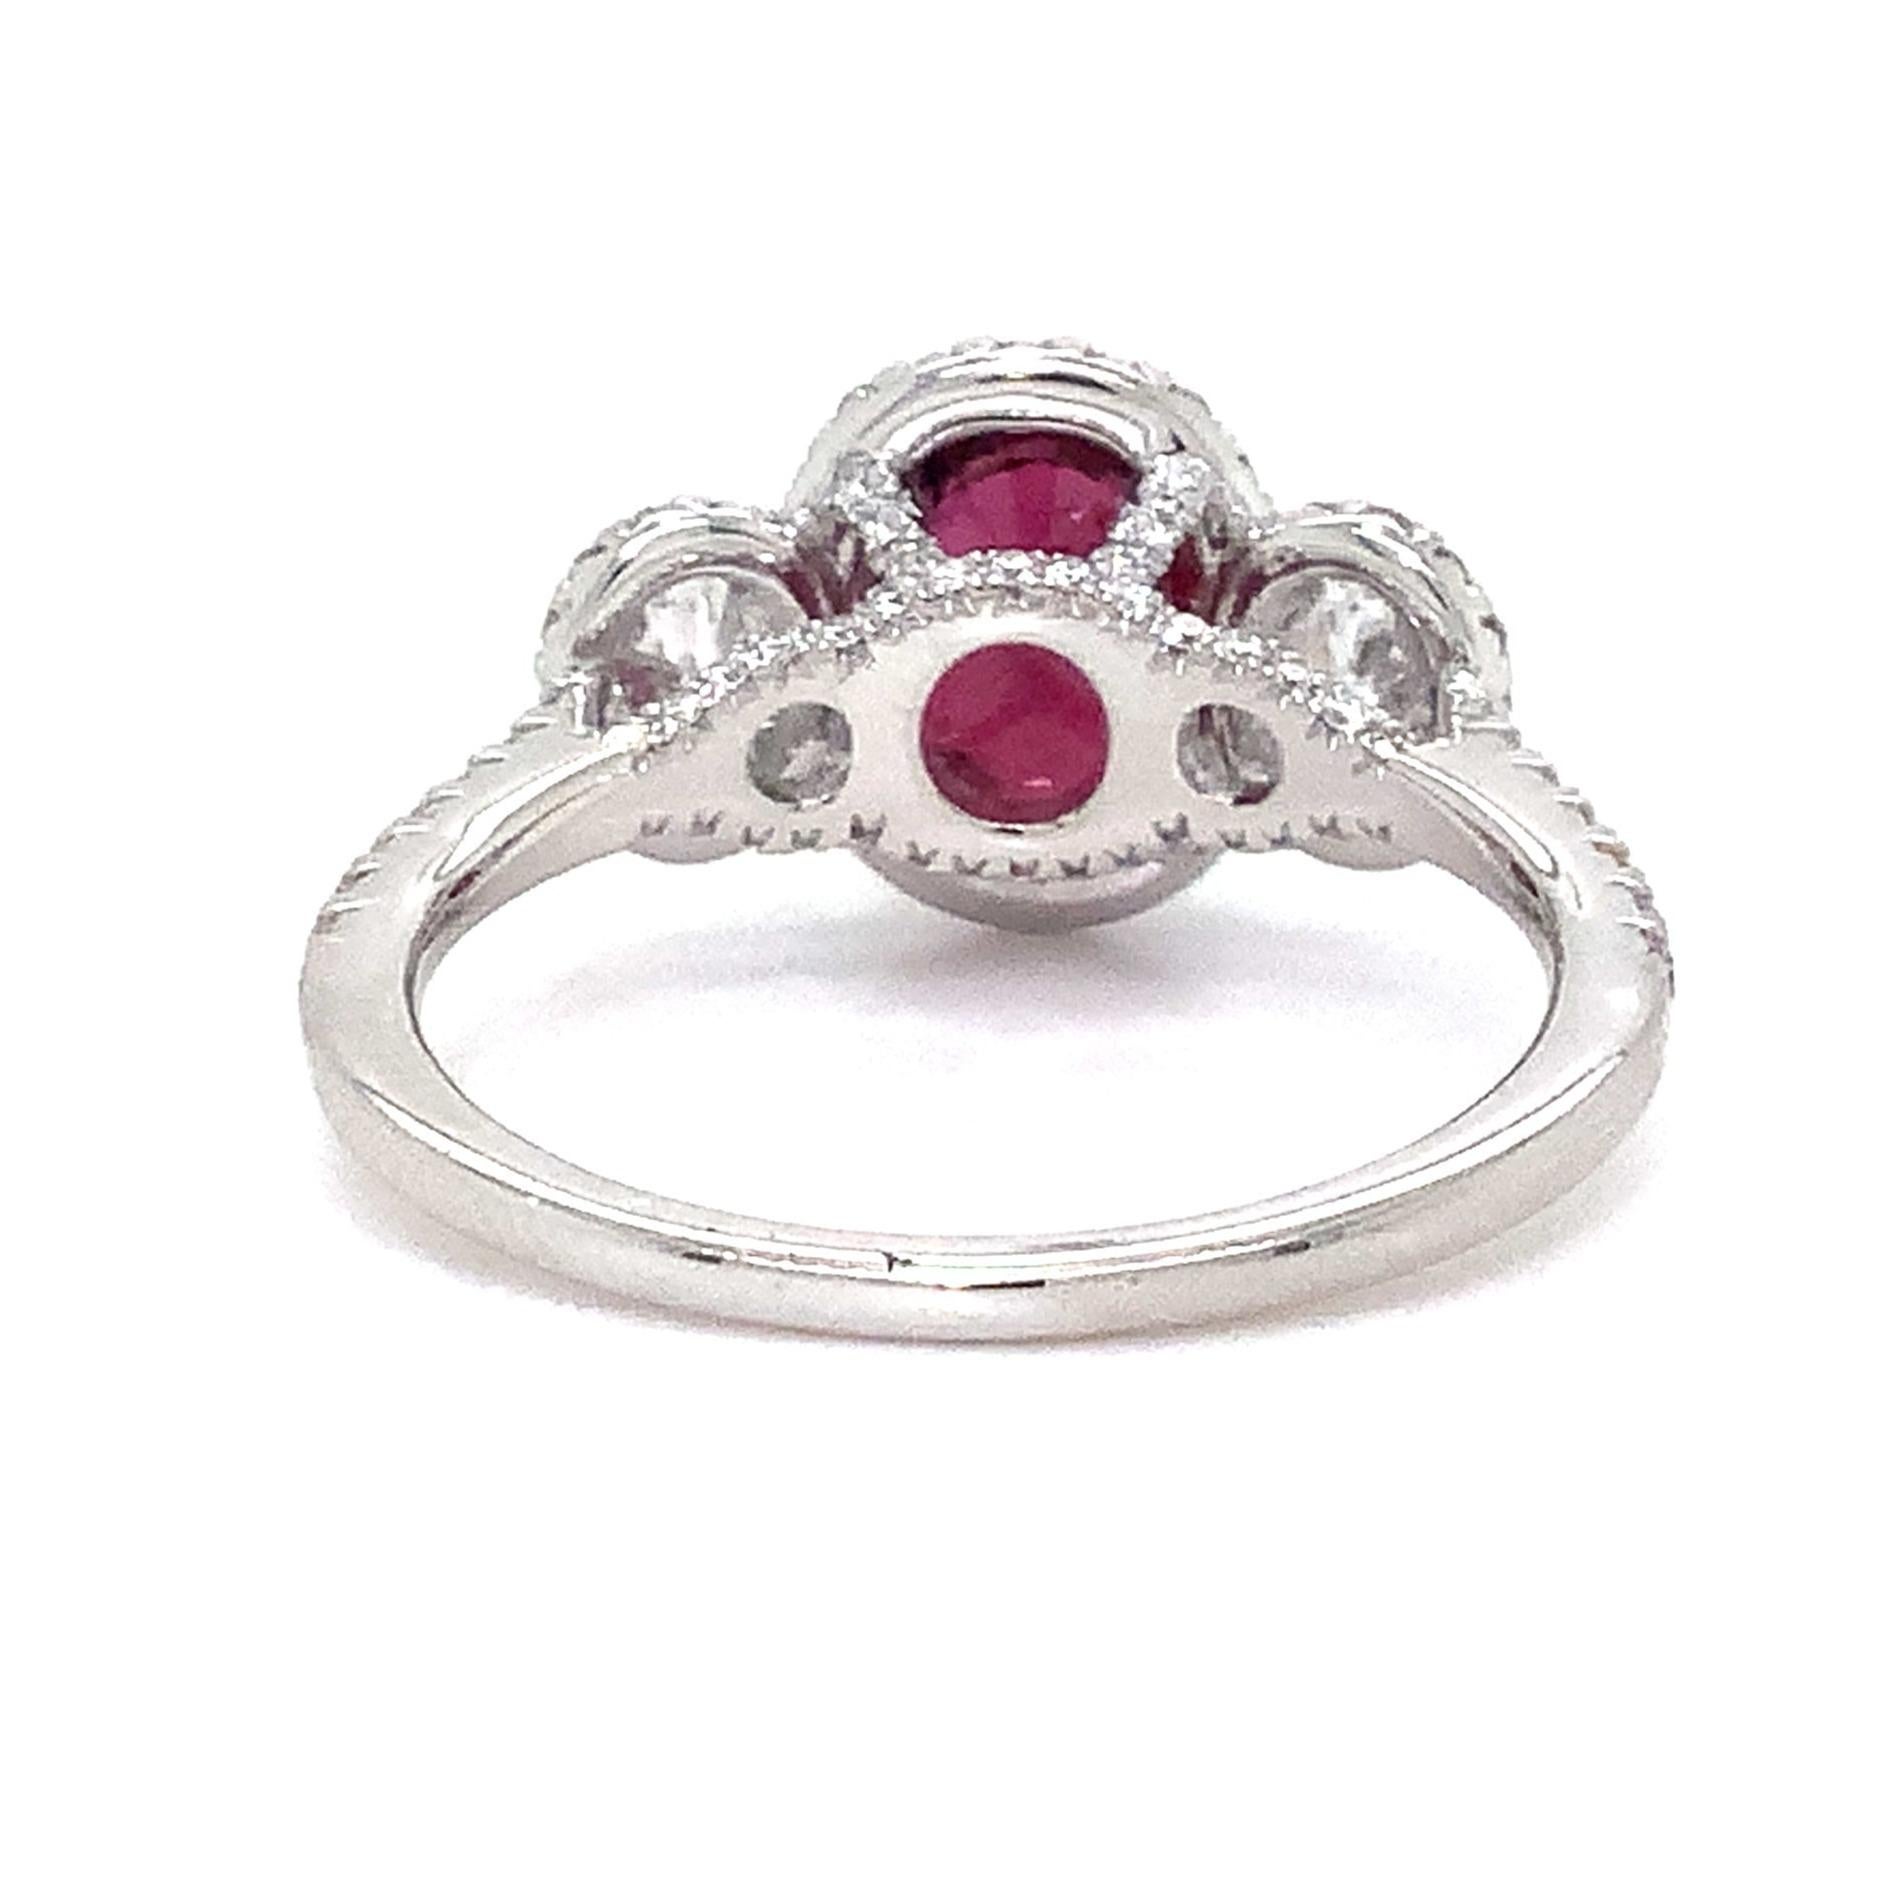 Women's Roman + Jules Gia Certified 3 Stone Ruby and Diamond Ring Set in 950 Platinum For Sale